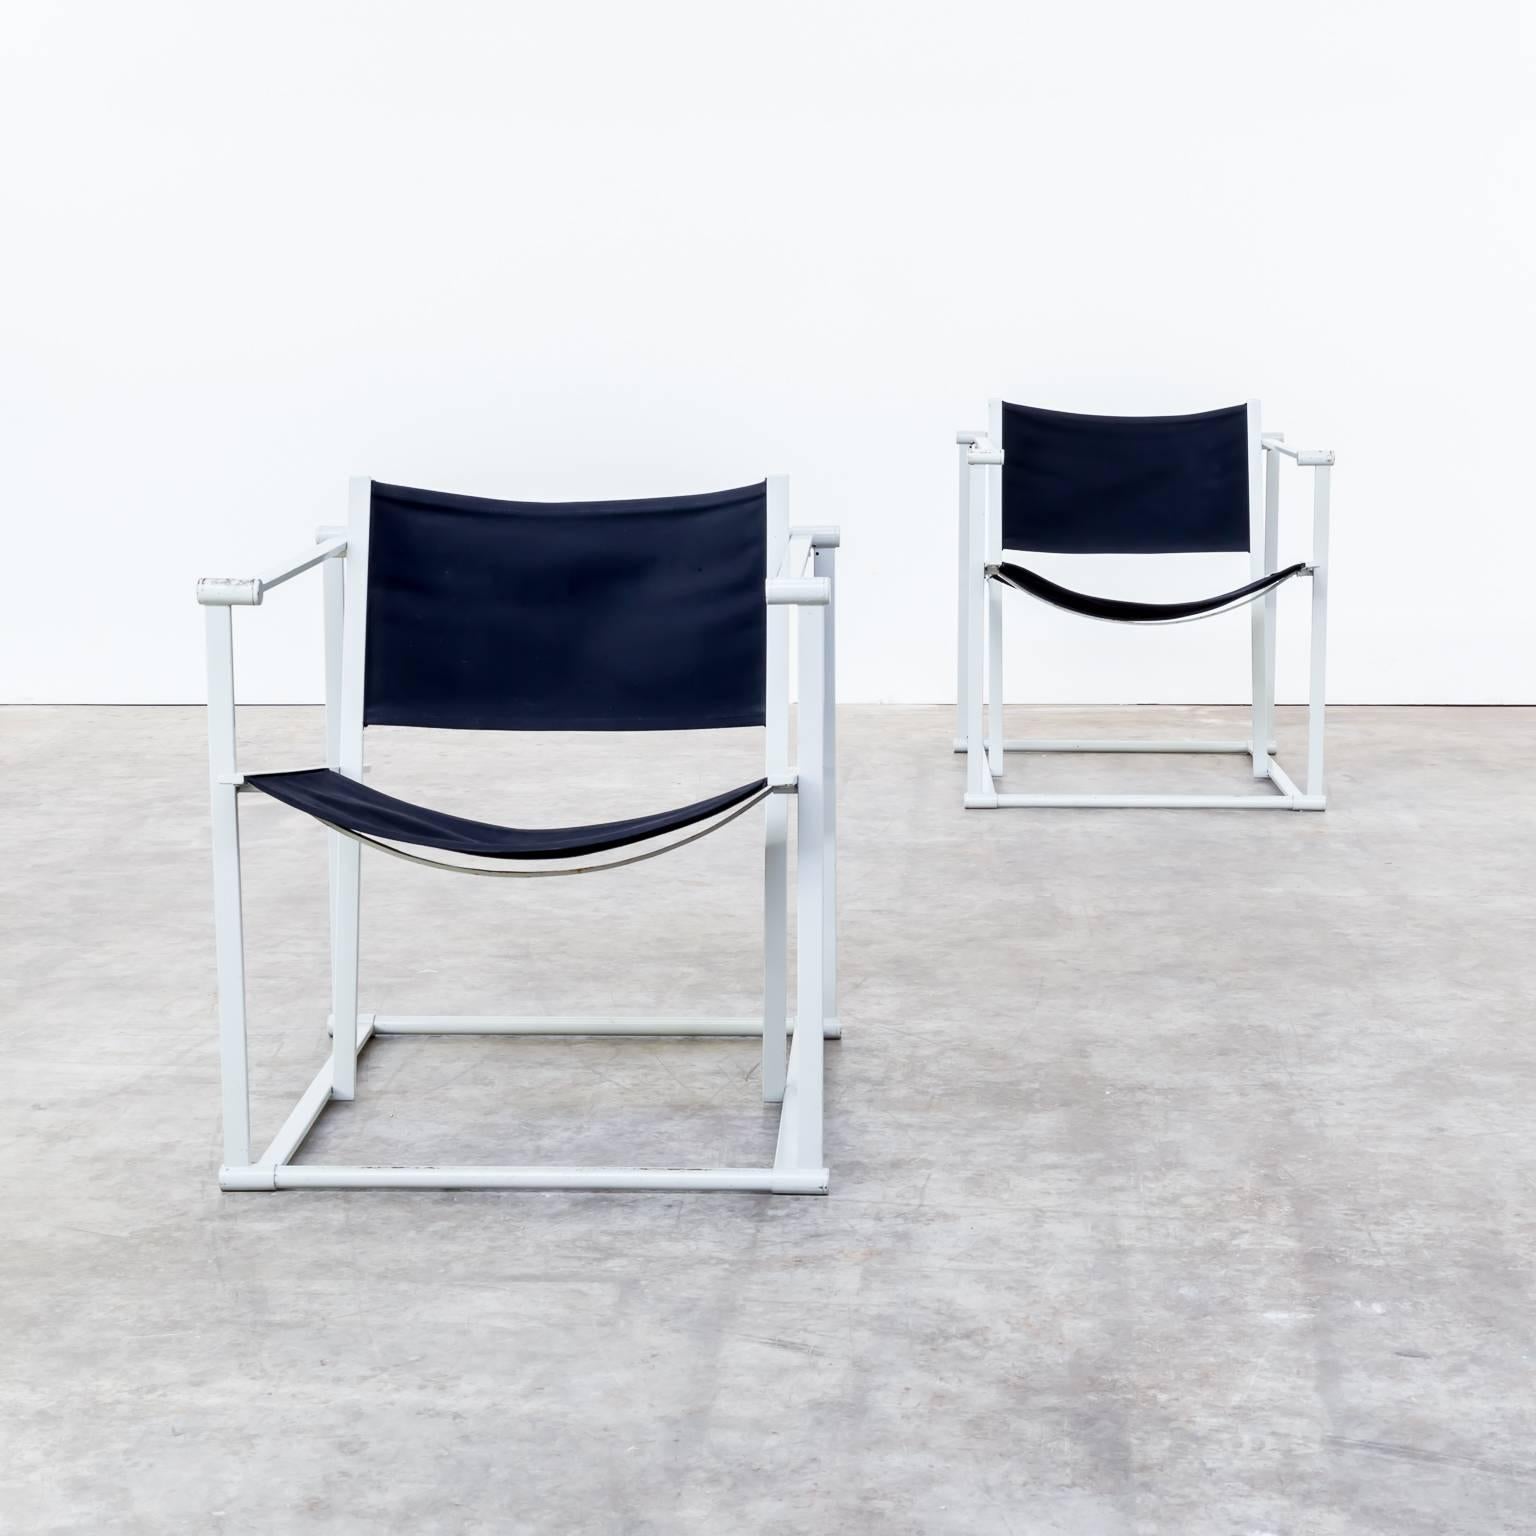 Set of two Radboud Van Beekum FM60 cubic chairs for Pastoe. Off-white frame, reupholstered new black canvas. Good condition, firm, consistent with age and use. Dimensions: 61cm W x 67cm D x 66 H, seat 33cm.